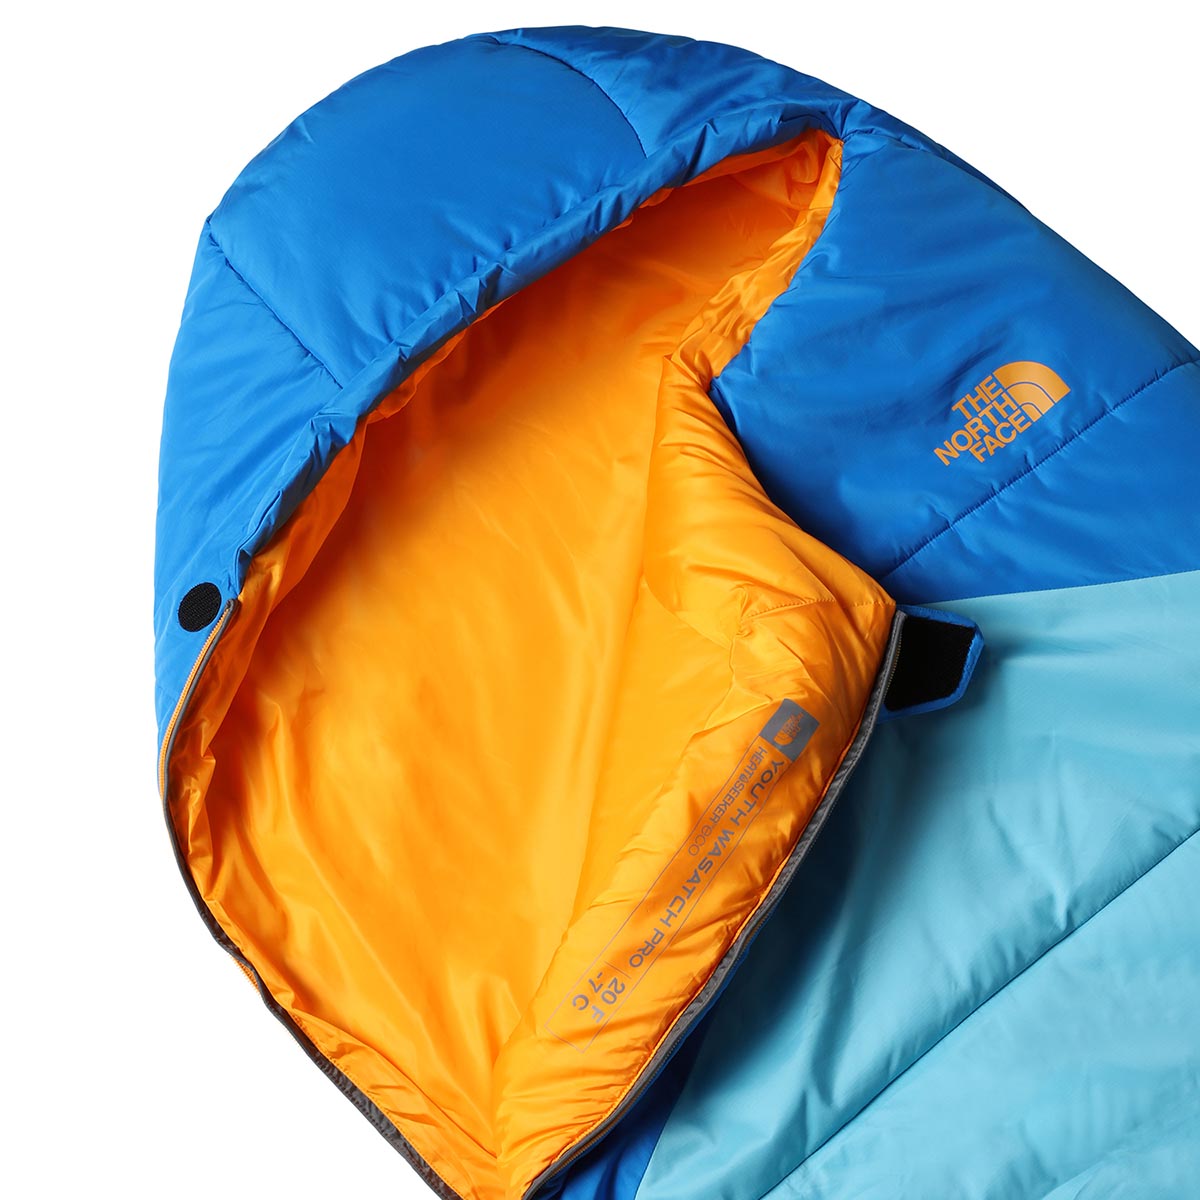 THE NORTH FACE - YOUTH WASATCH PRO 20